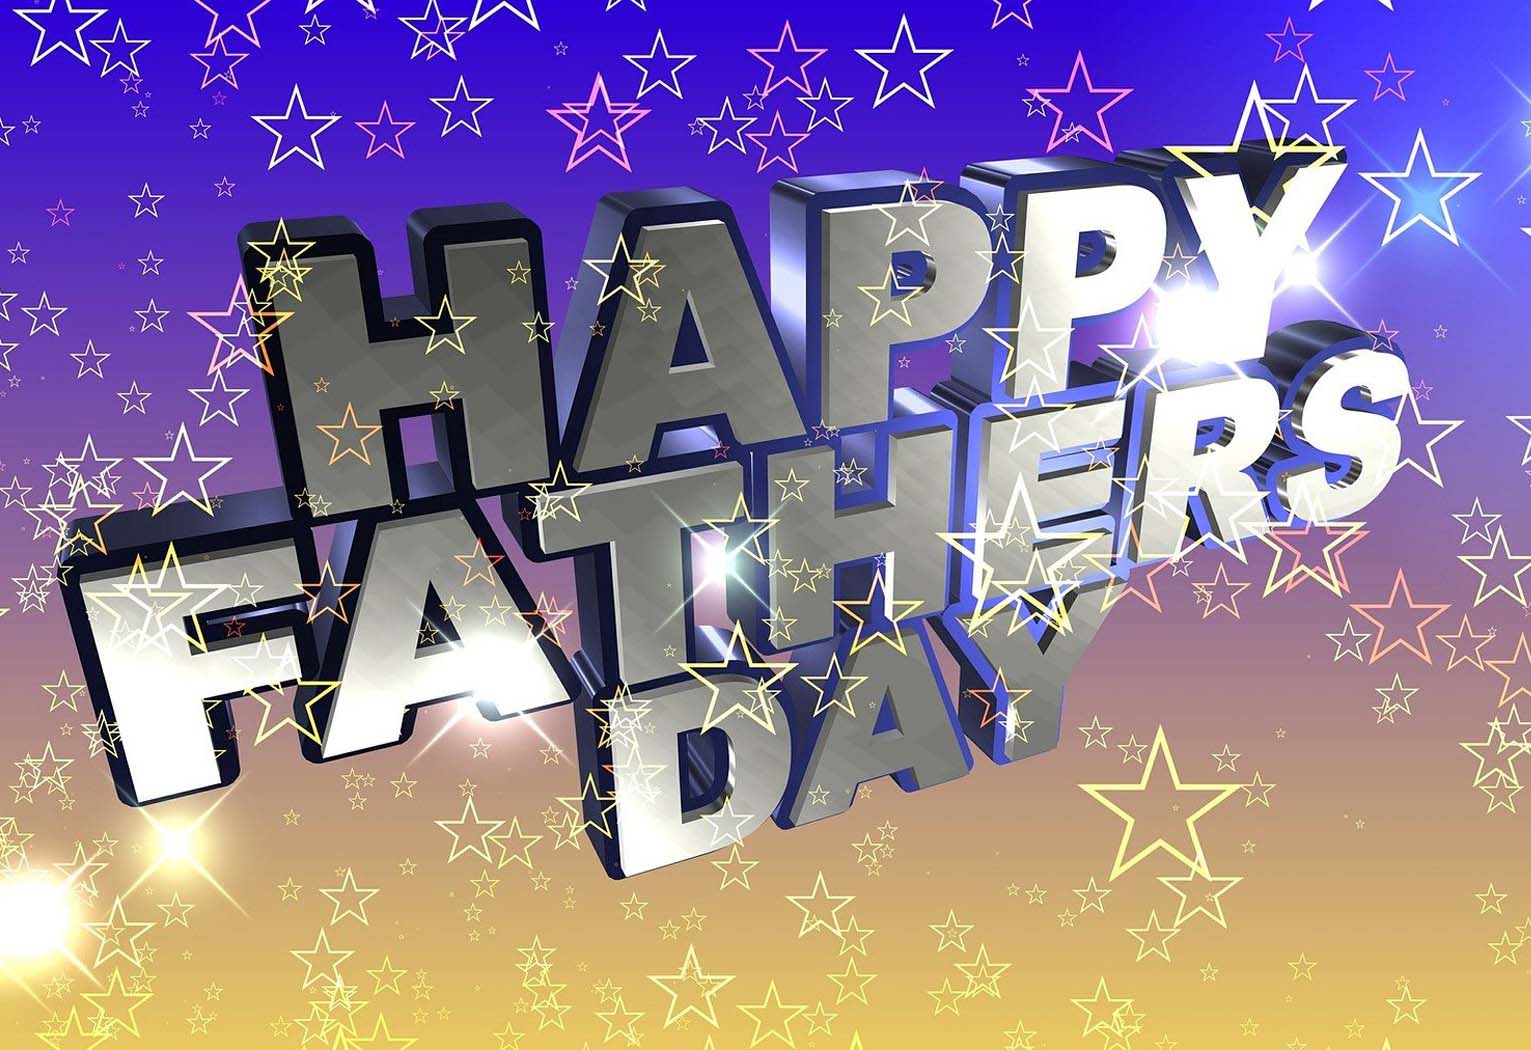 Happy Fathers Day 2022 Images